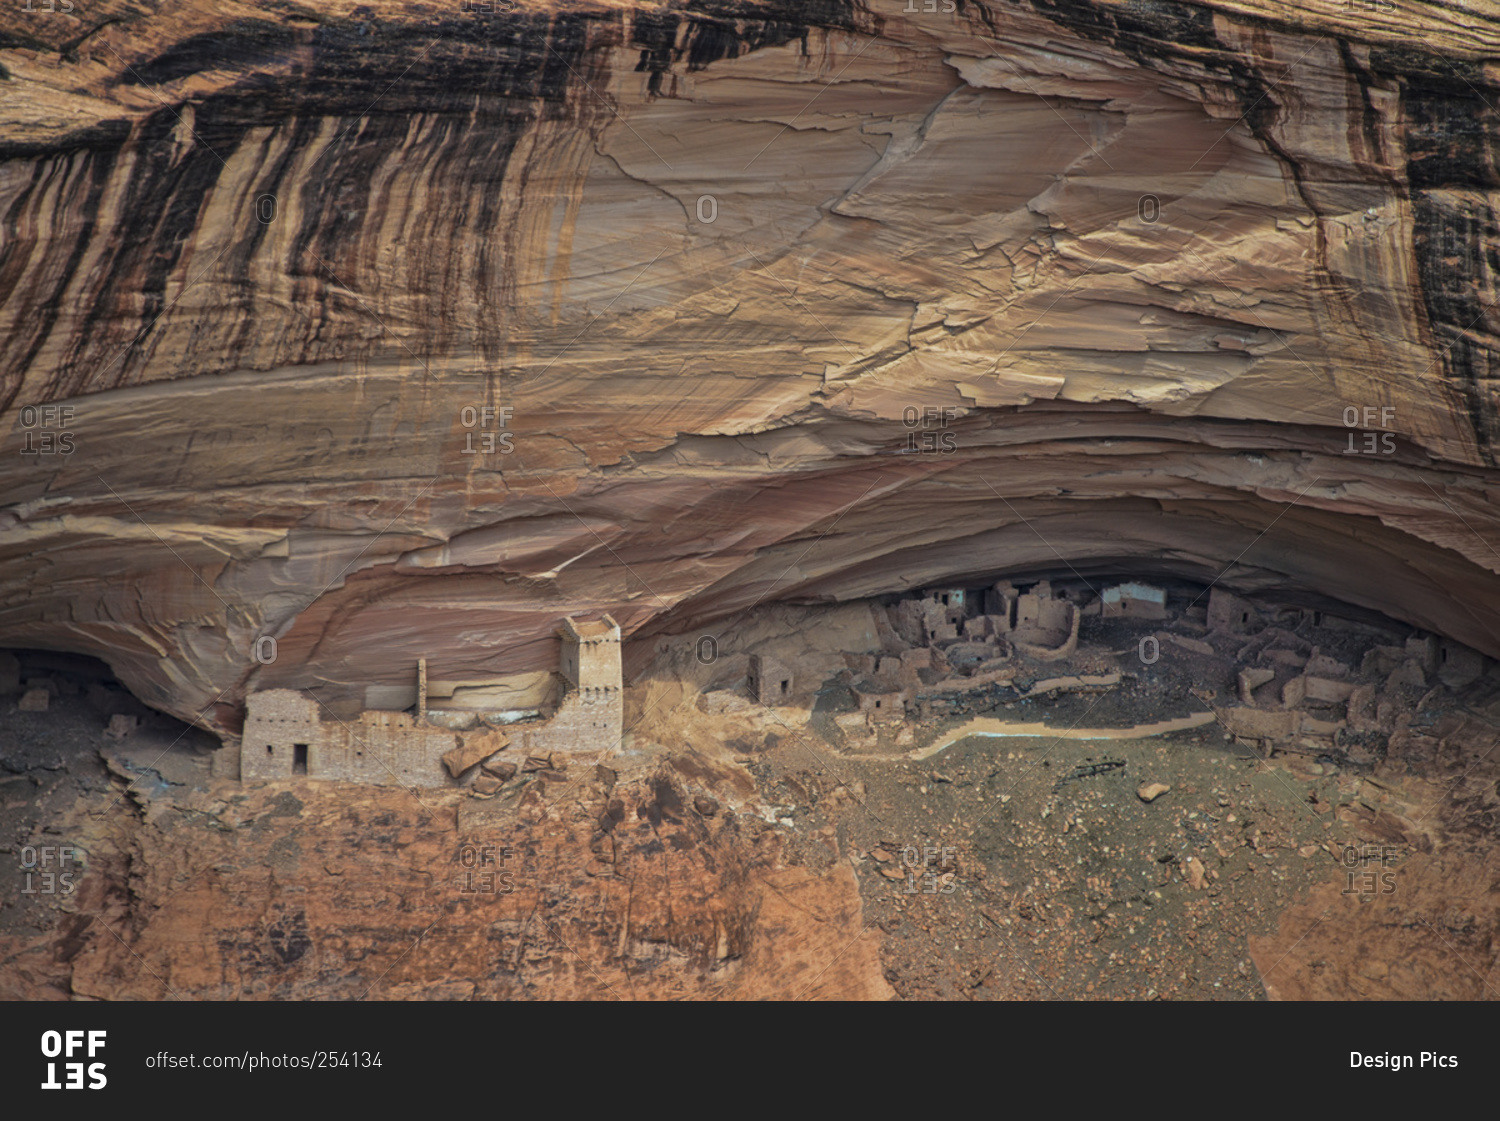 Cliff dwelling at Canyon De Chelly National Monument in Arizona